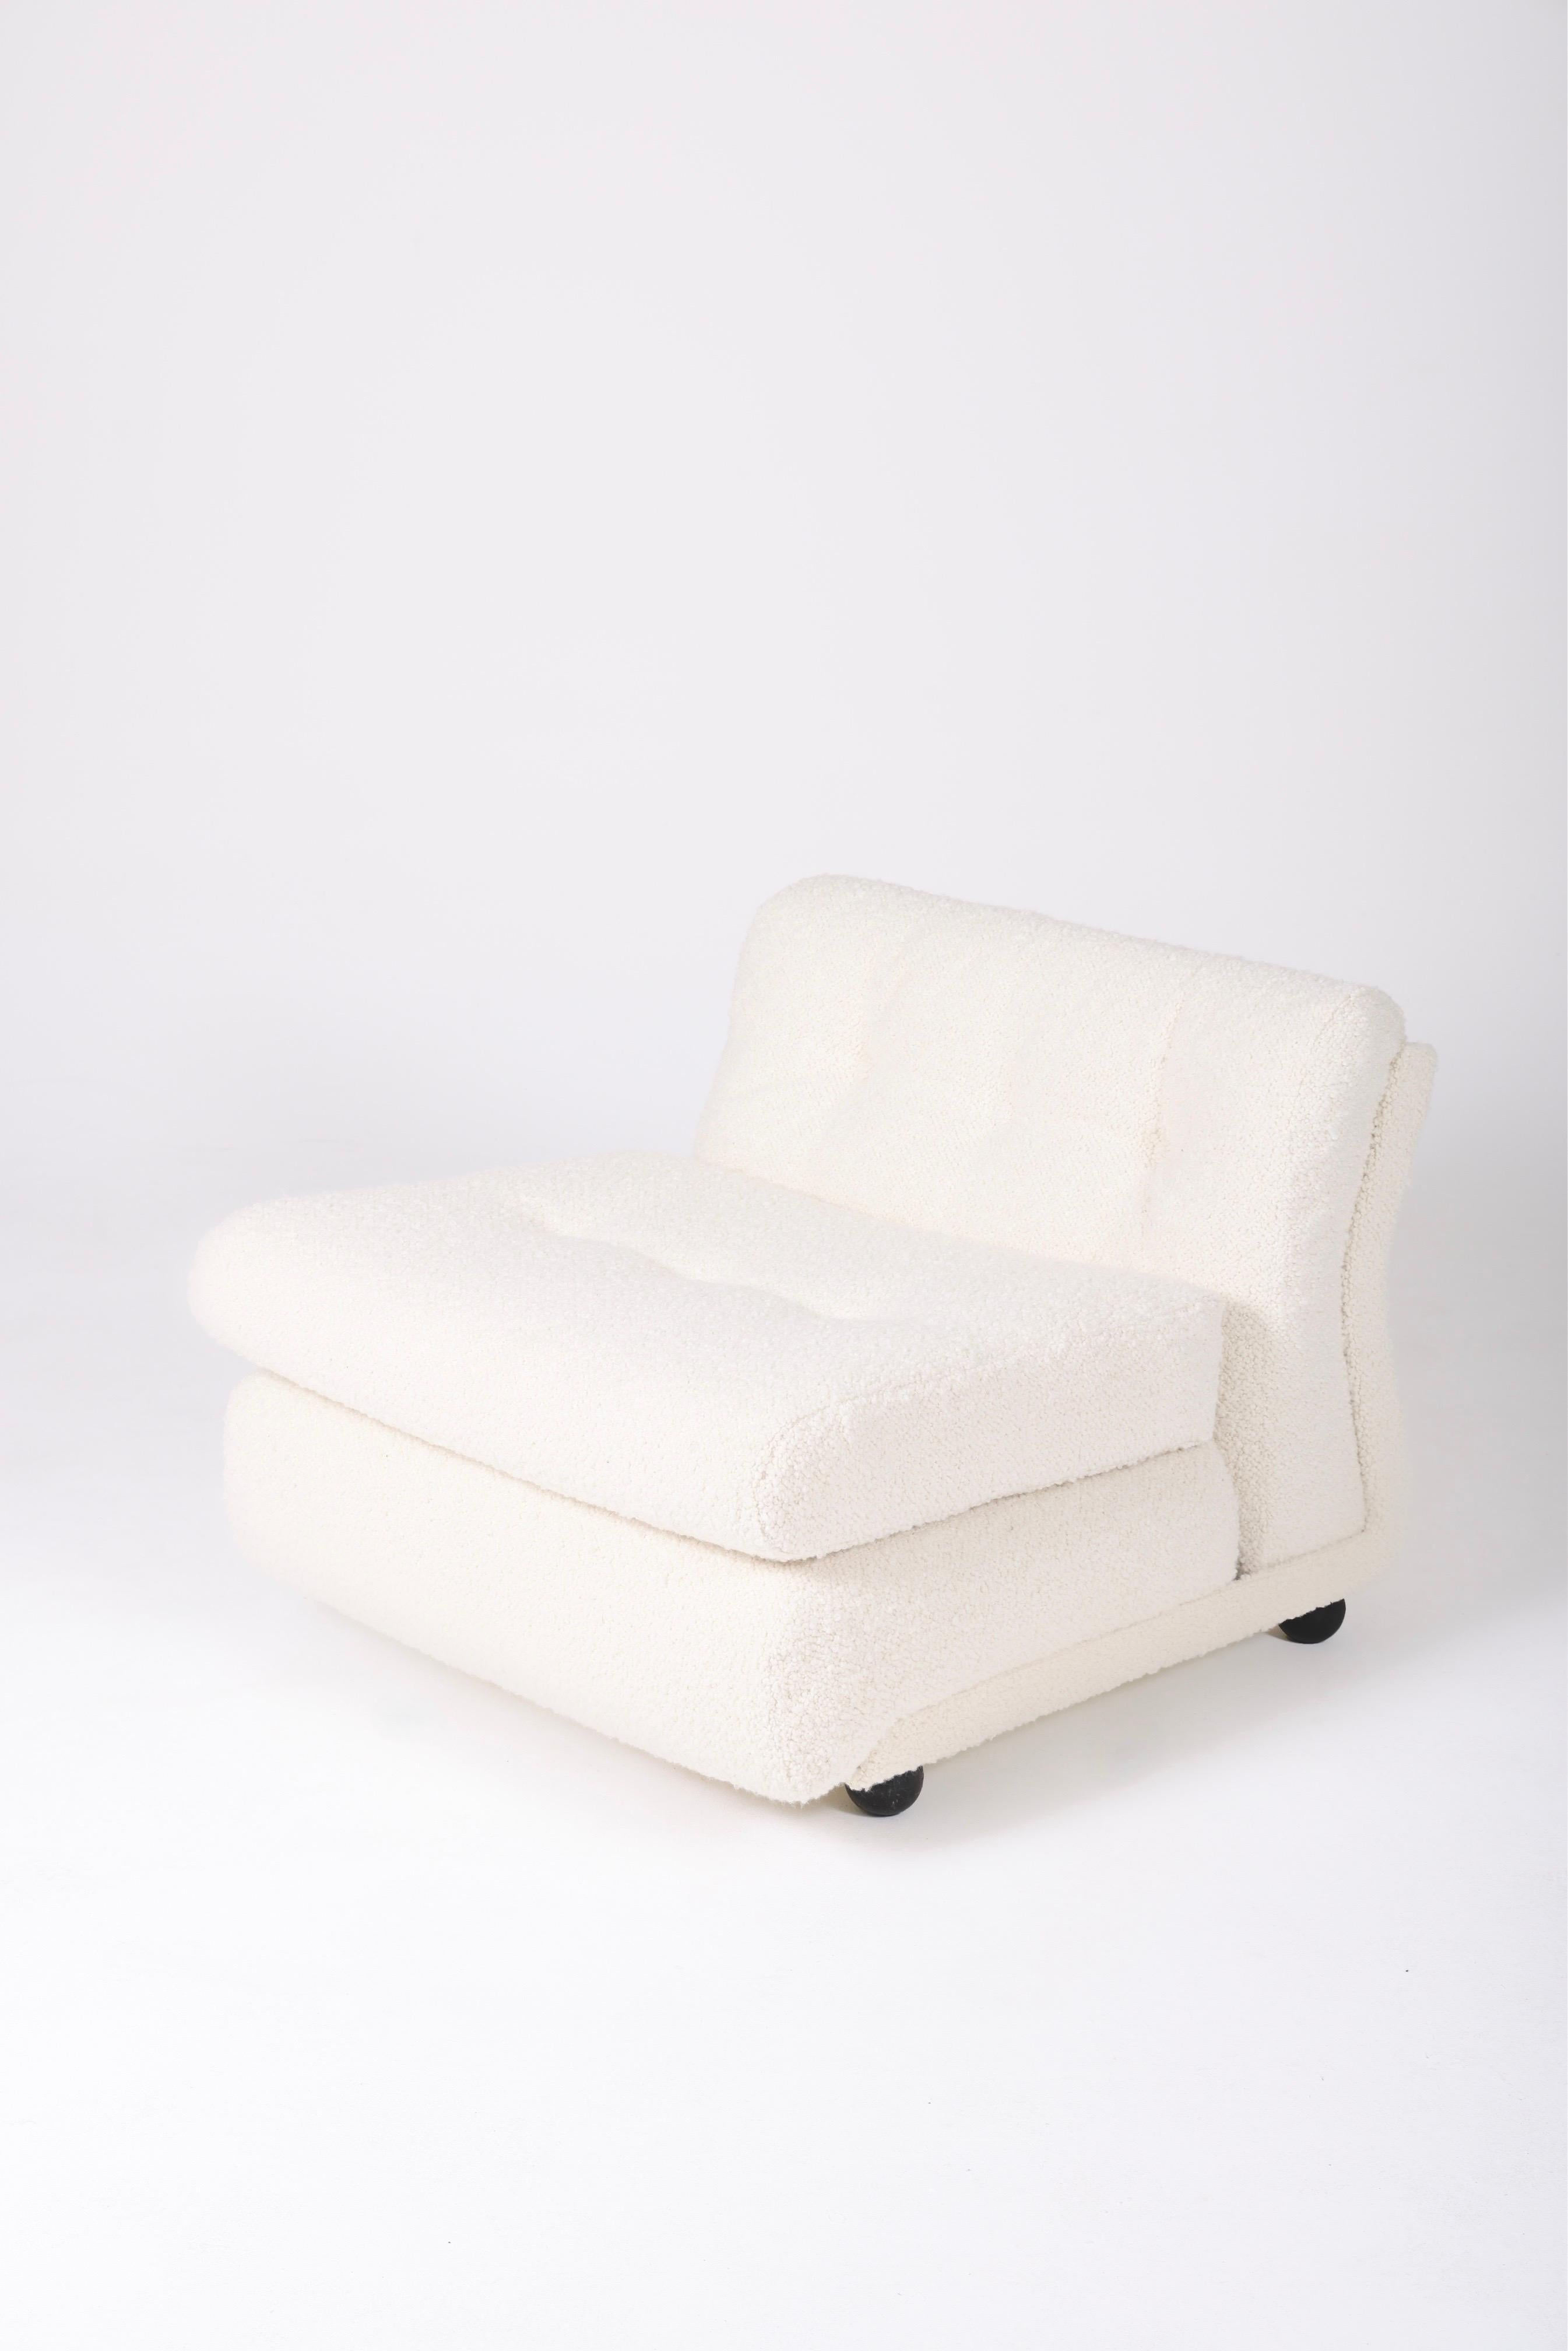 Armchair model Amanta by designer Mario Bellini, 1970s, Italy. Fireside chair completely reupholstered in a top-of-the-range white fabric, including the rear part of the fireside chair. 
Perfect condition.
DV.